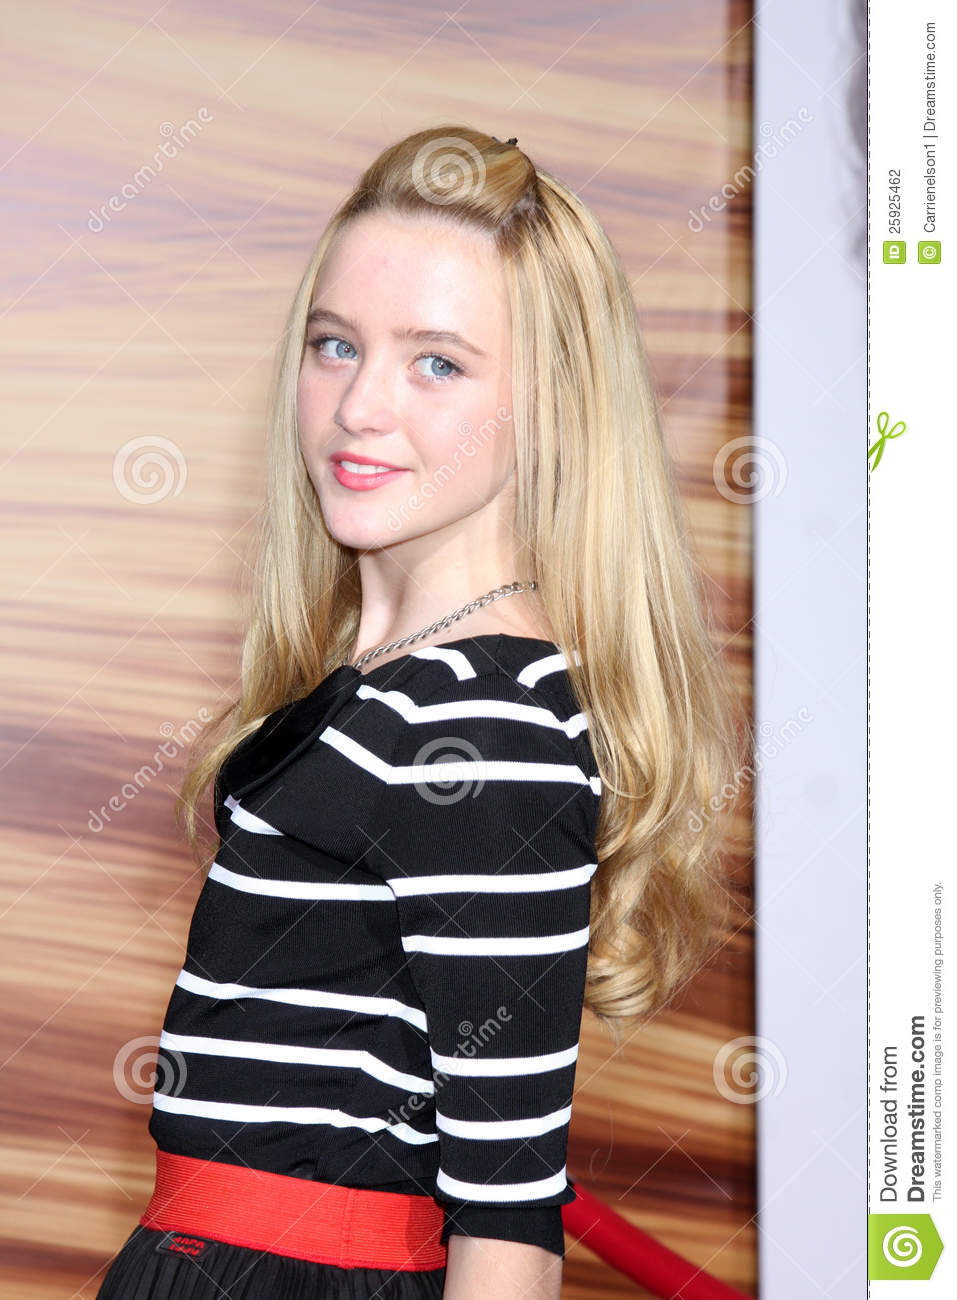 Pictures of Kathryn Newton, Picture #263486 - Pictures Of Celebrities